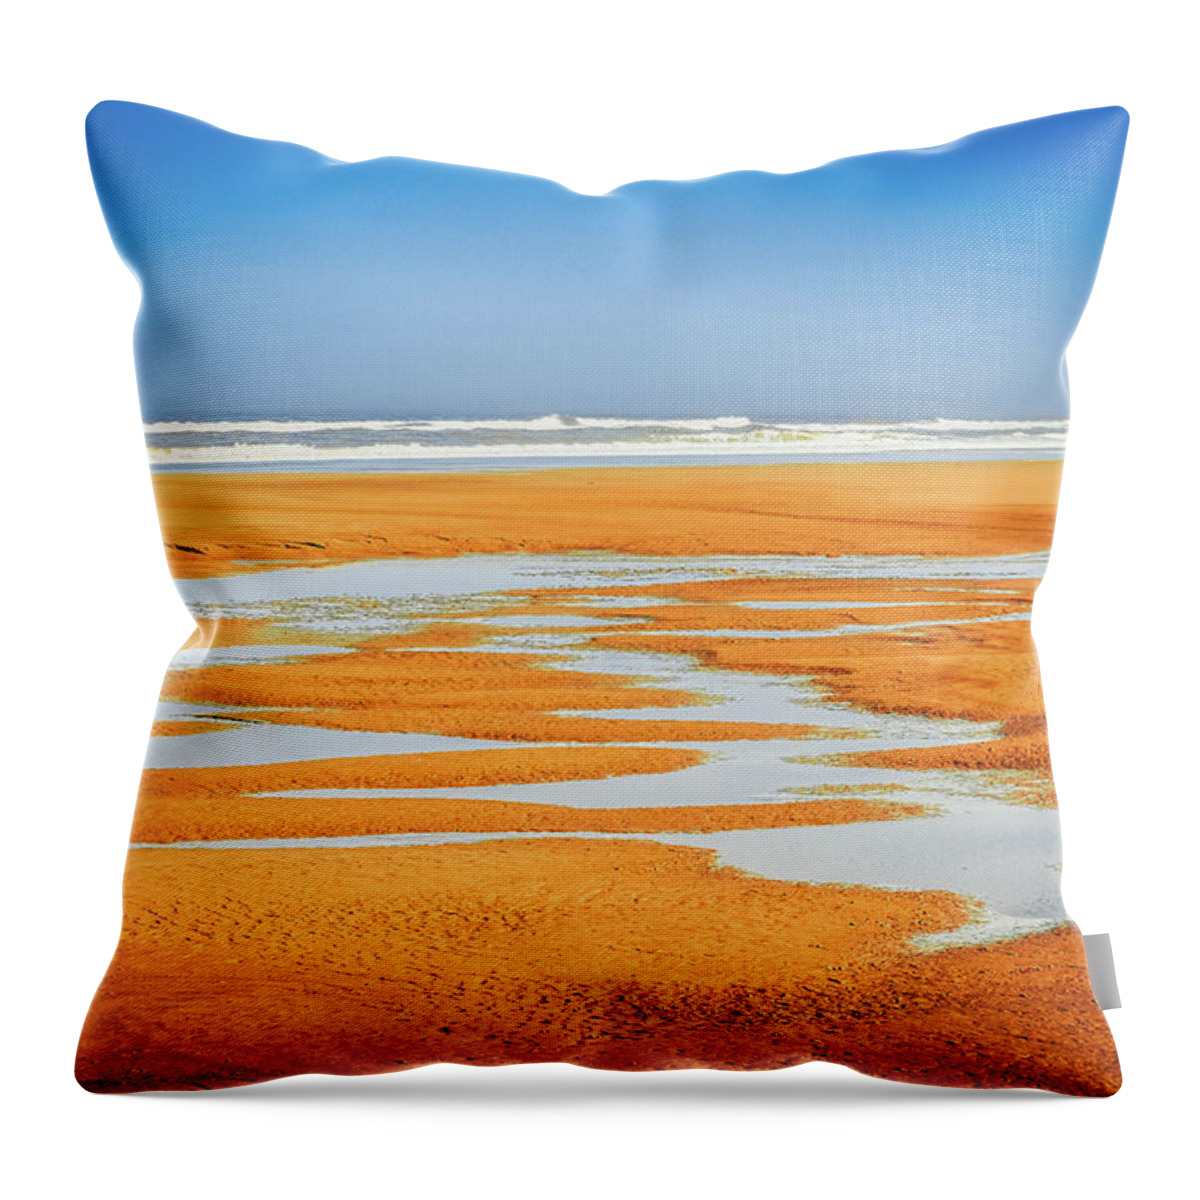 Sand Patterns Throw Pillow featuring the photograph Sand Patterns No.2 by Bonnie Bruno